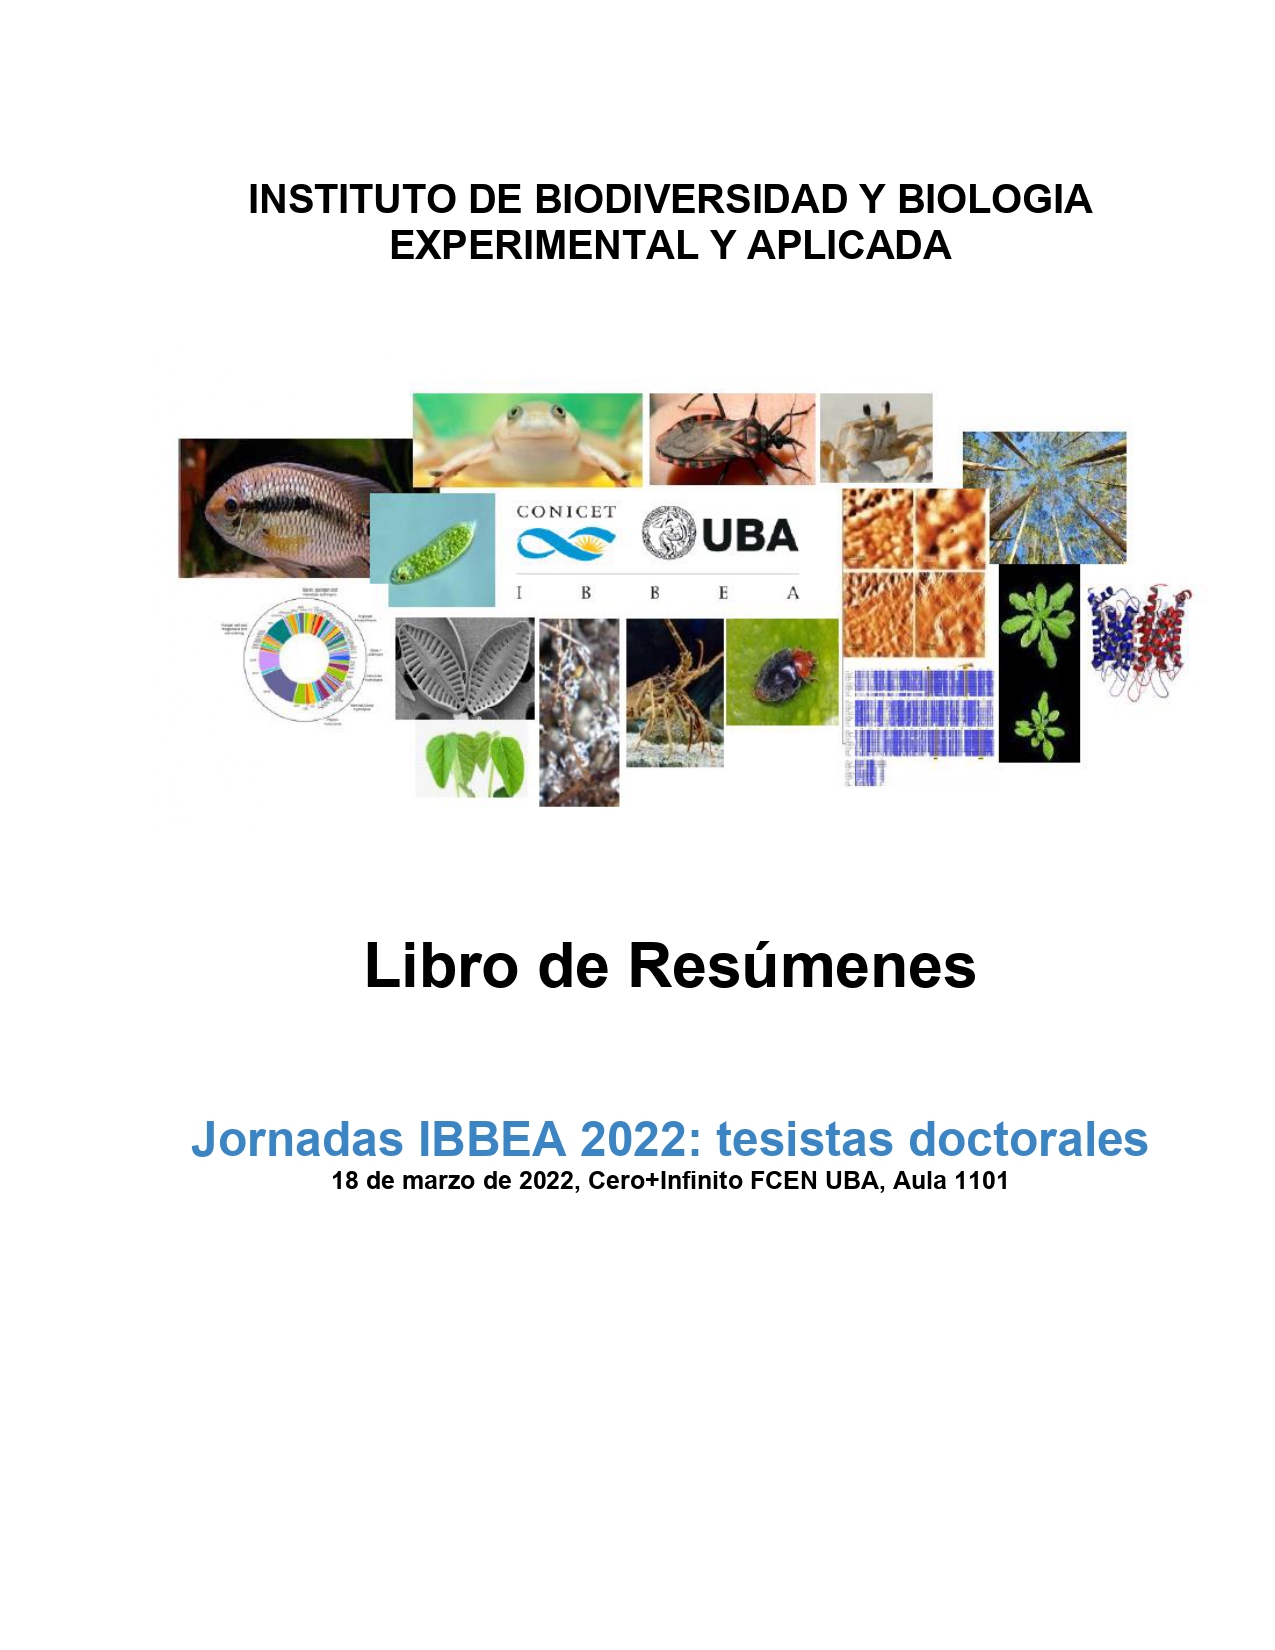 IBBEA_2022_libro resumenes_v02_pages-to-jpg-0001